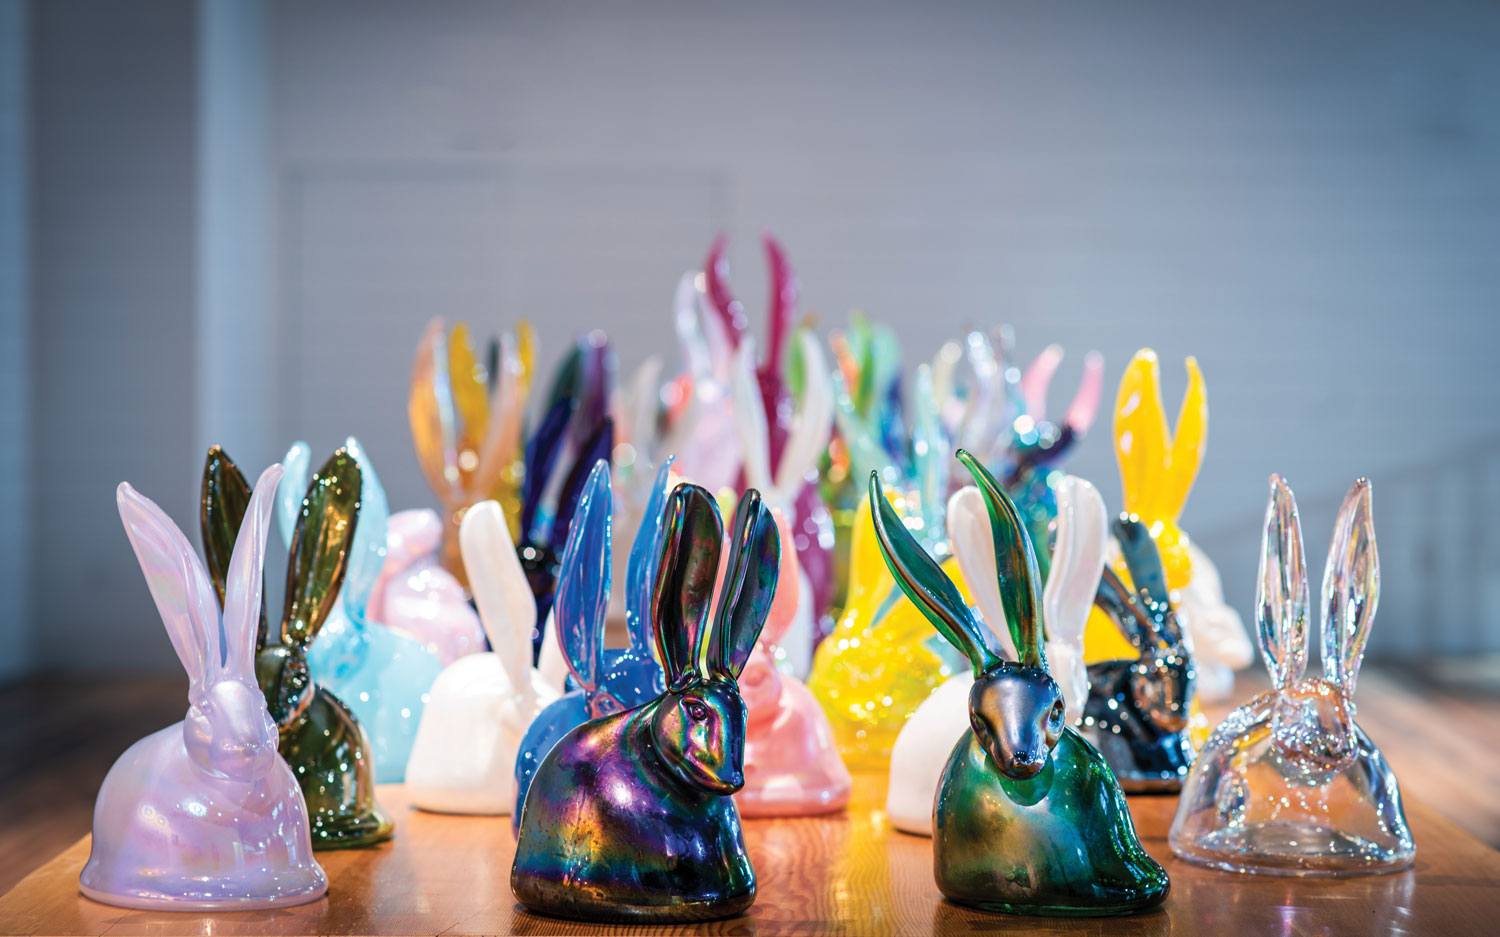 Made in collaboration with Glass Eye Studio, Slonem’s new blown-glass bunnies range tremendously in color and opalescence.